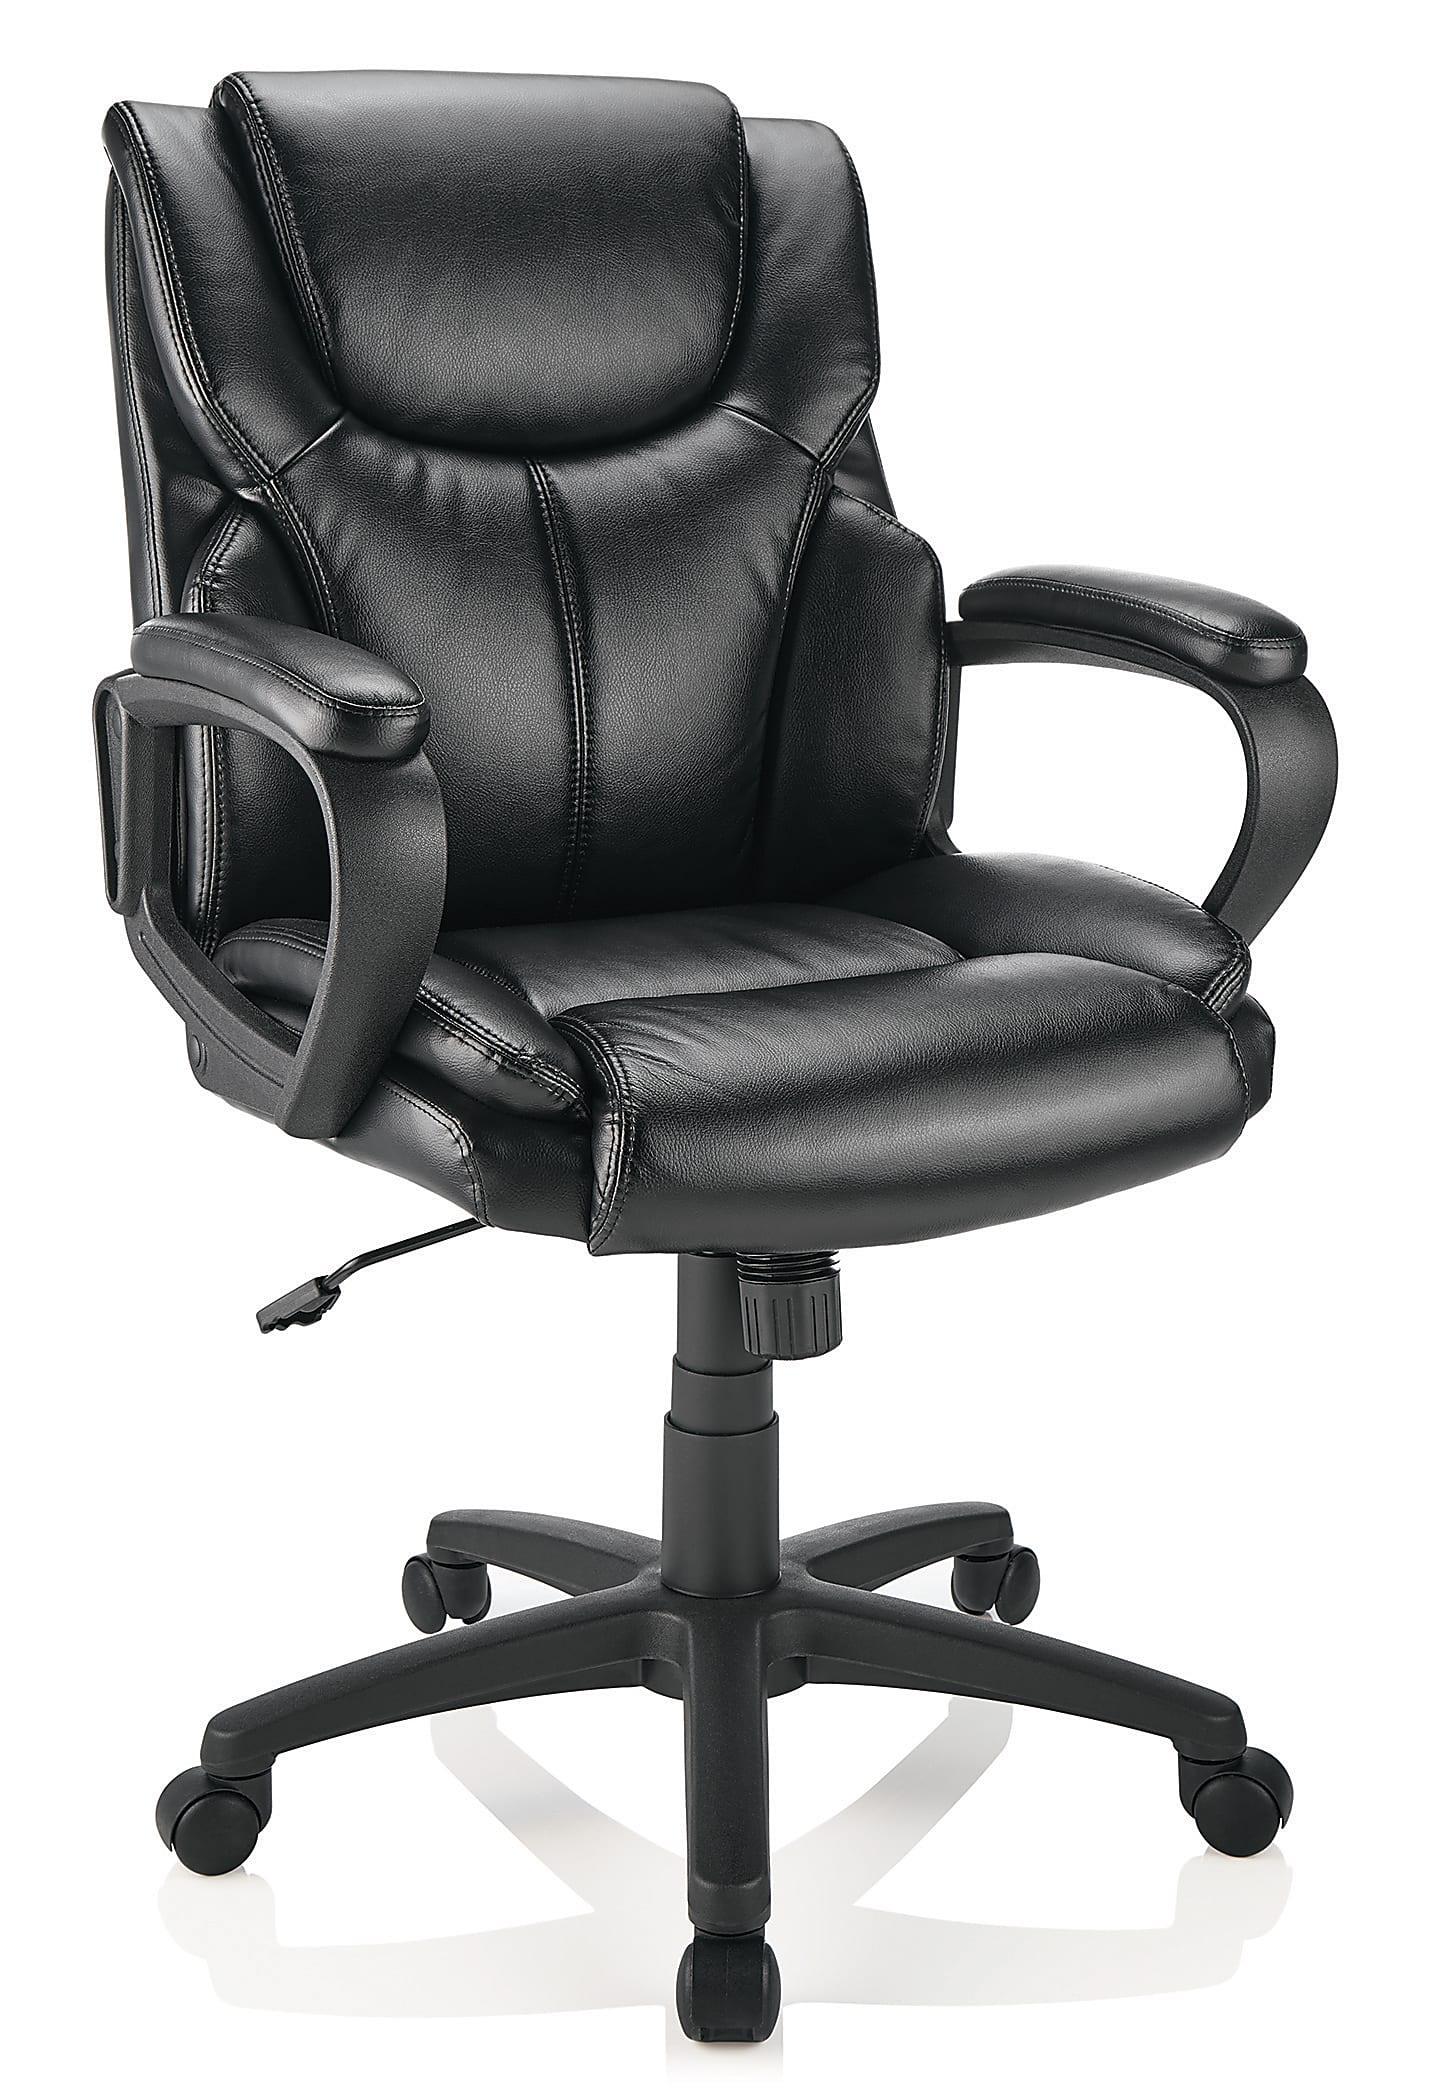 Realspace Office Task Chairs:Brenton Studio Mayhart Mid-Back Chair $76, Praxley Low-Back Task Chair $57 & More + Free Store Pickup at Office Depot/ OfficeMax